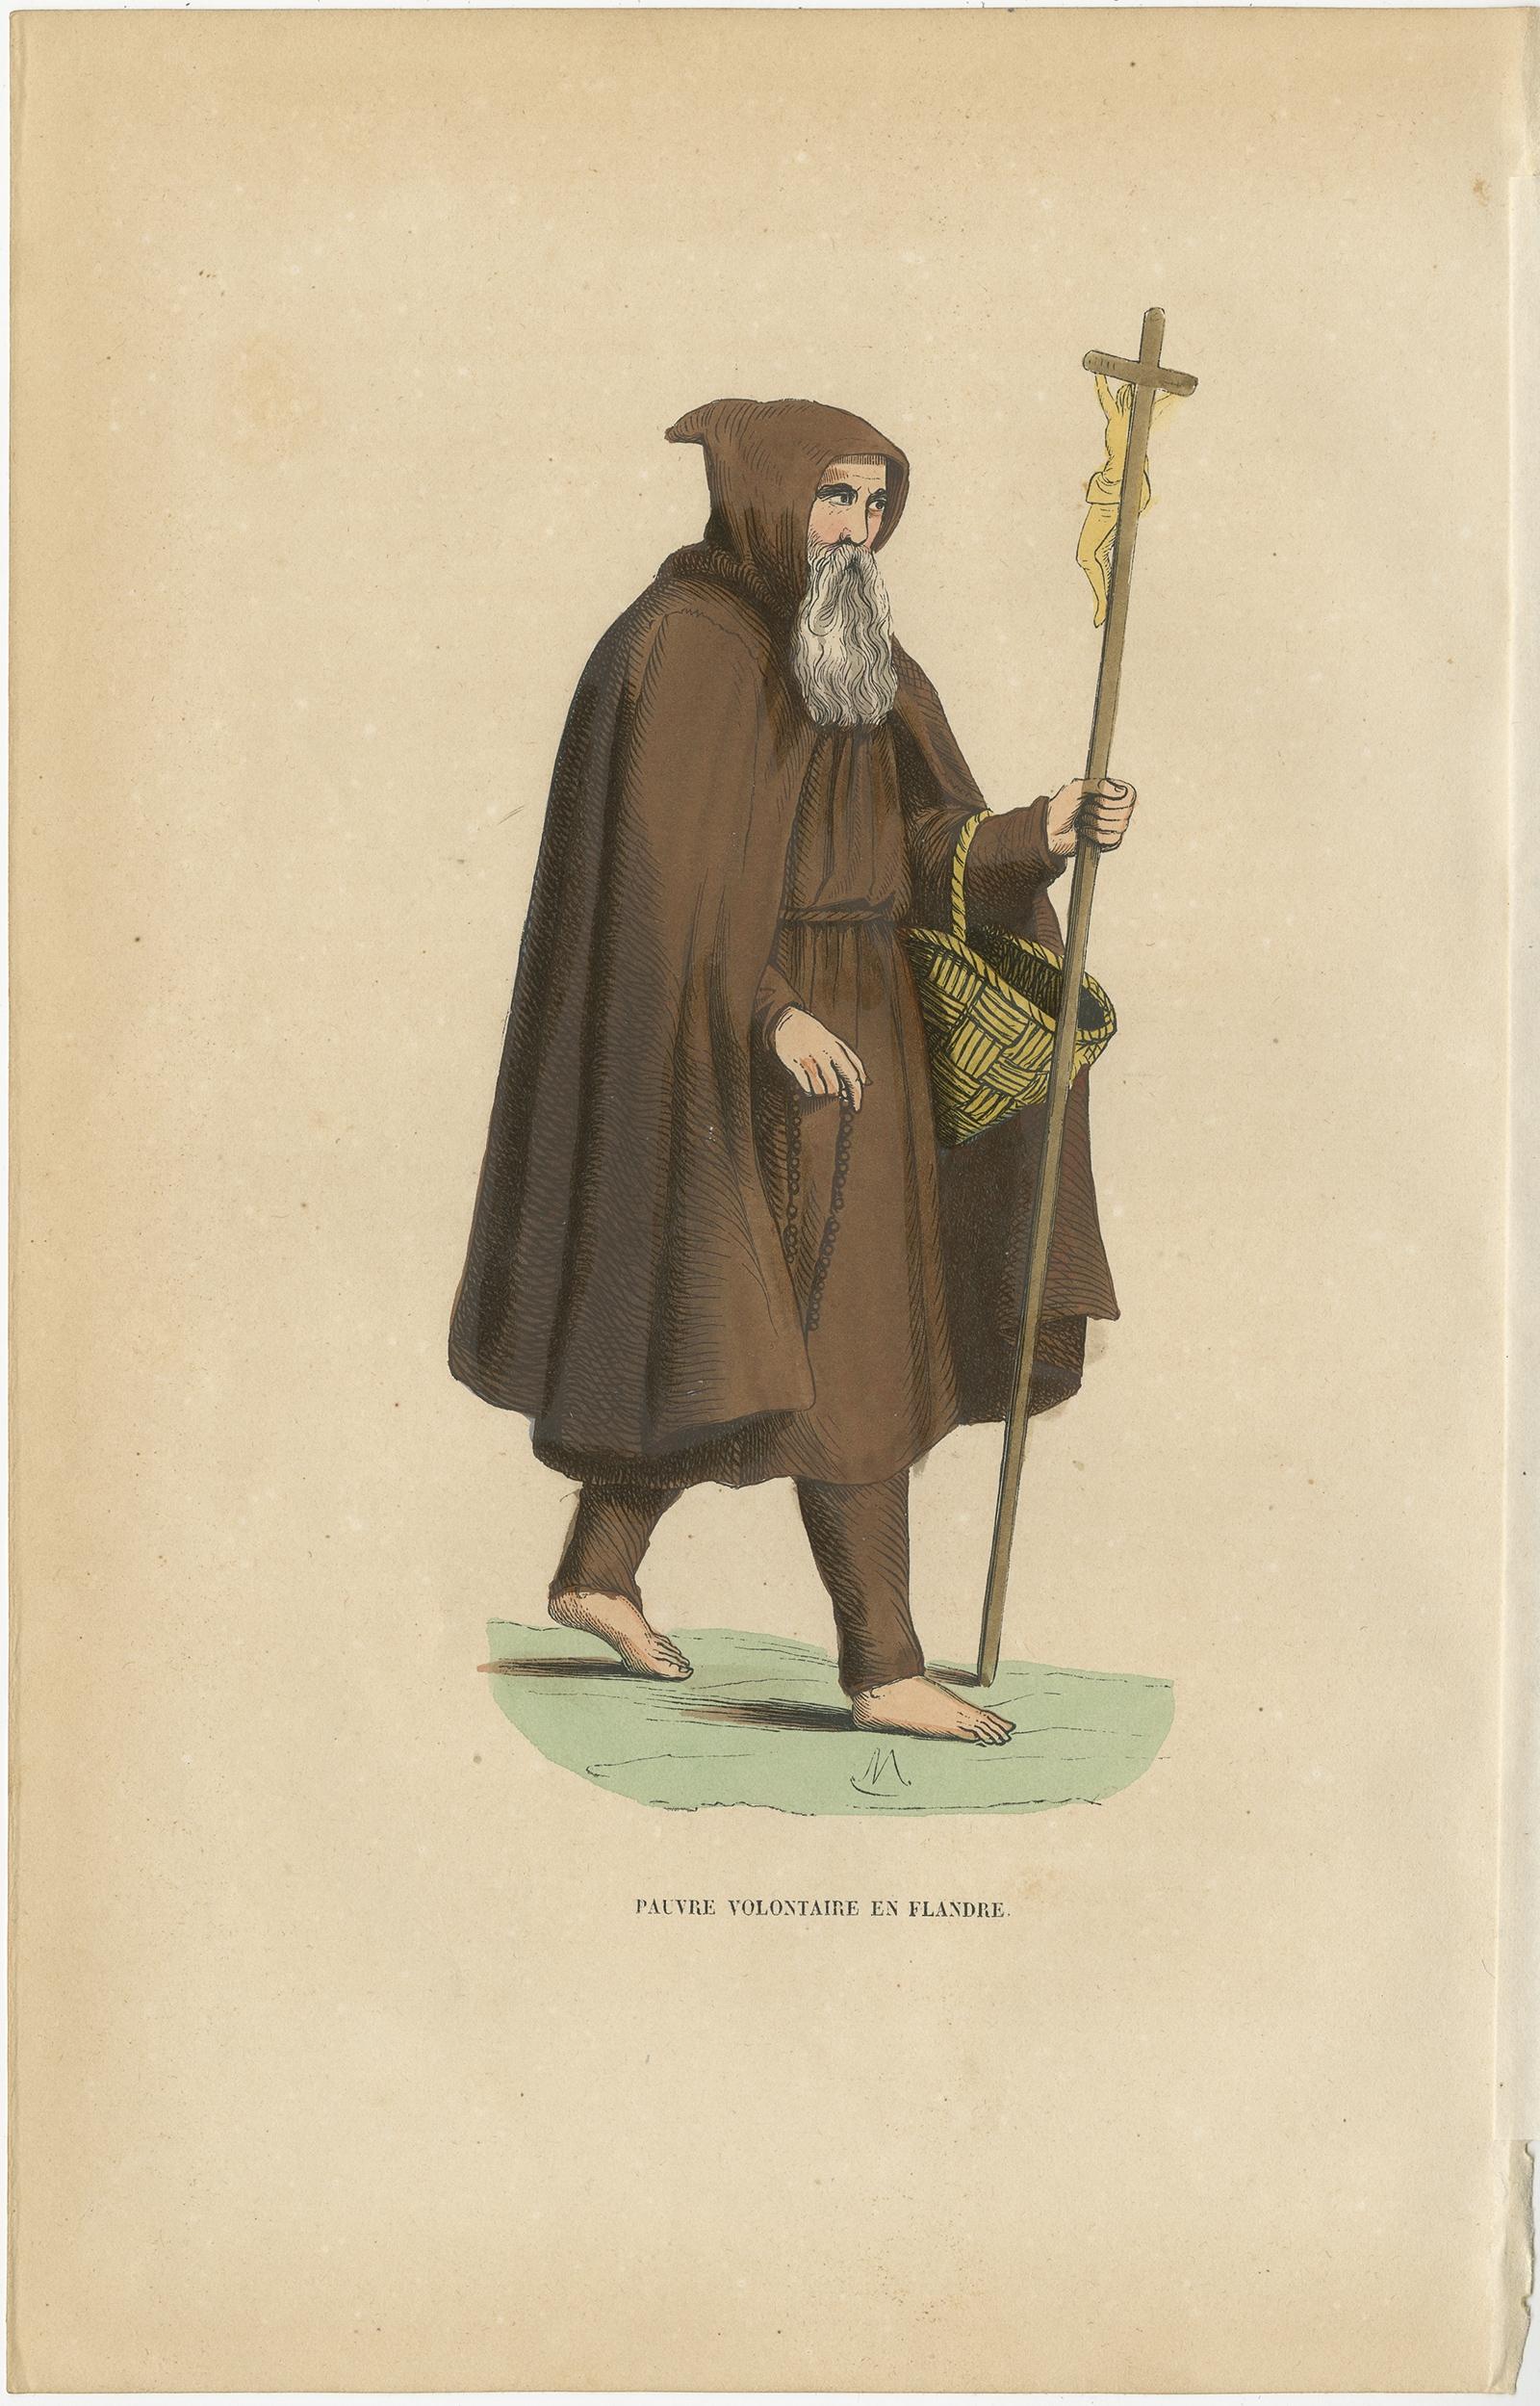 Antique print titled 'Pauvre Volontaire en Flandre'. 

Print of a Monk of the order of Poor Volunteers with crucifix and basket. This print originates from 'Histoire et Costumes des Ordres Religieux'.

Artists and Engravers: Author: Abbé Tiron.